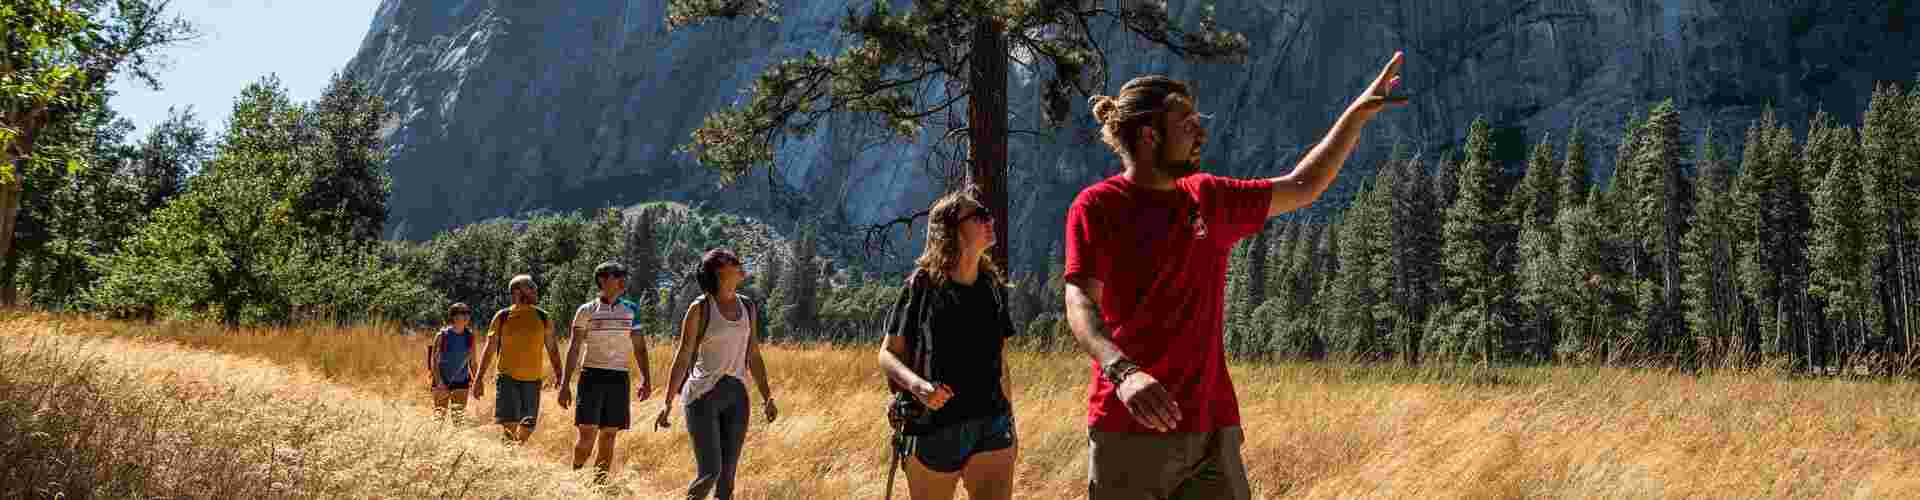 A group of Intrepid travellers on a hike in Yosemite